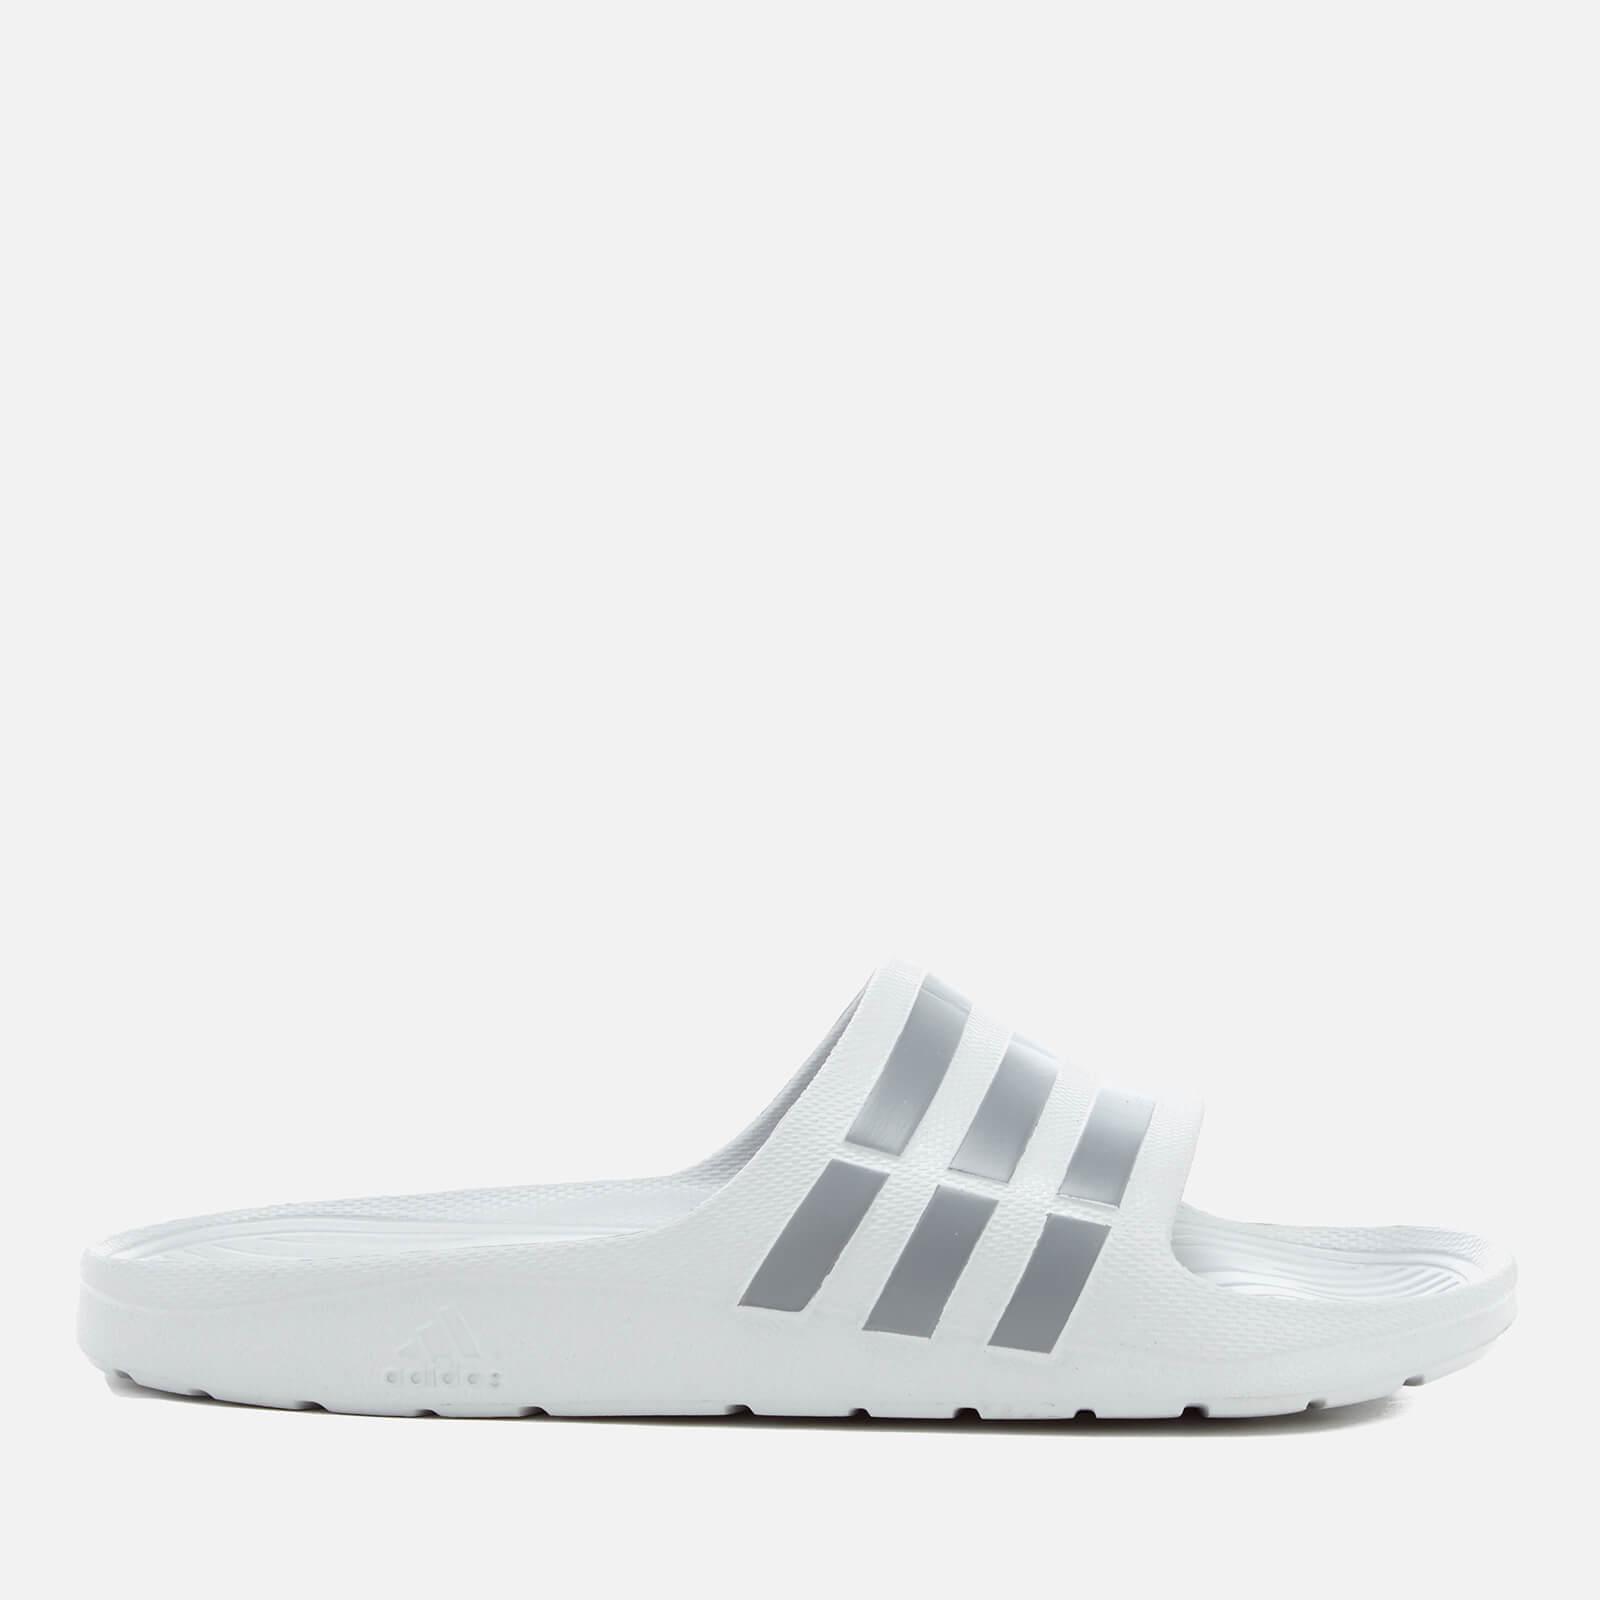 Buy Adidas Duramo Slide G15890 Mens SANDALES Online at Low Prices in India  - Paytmmall.com